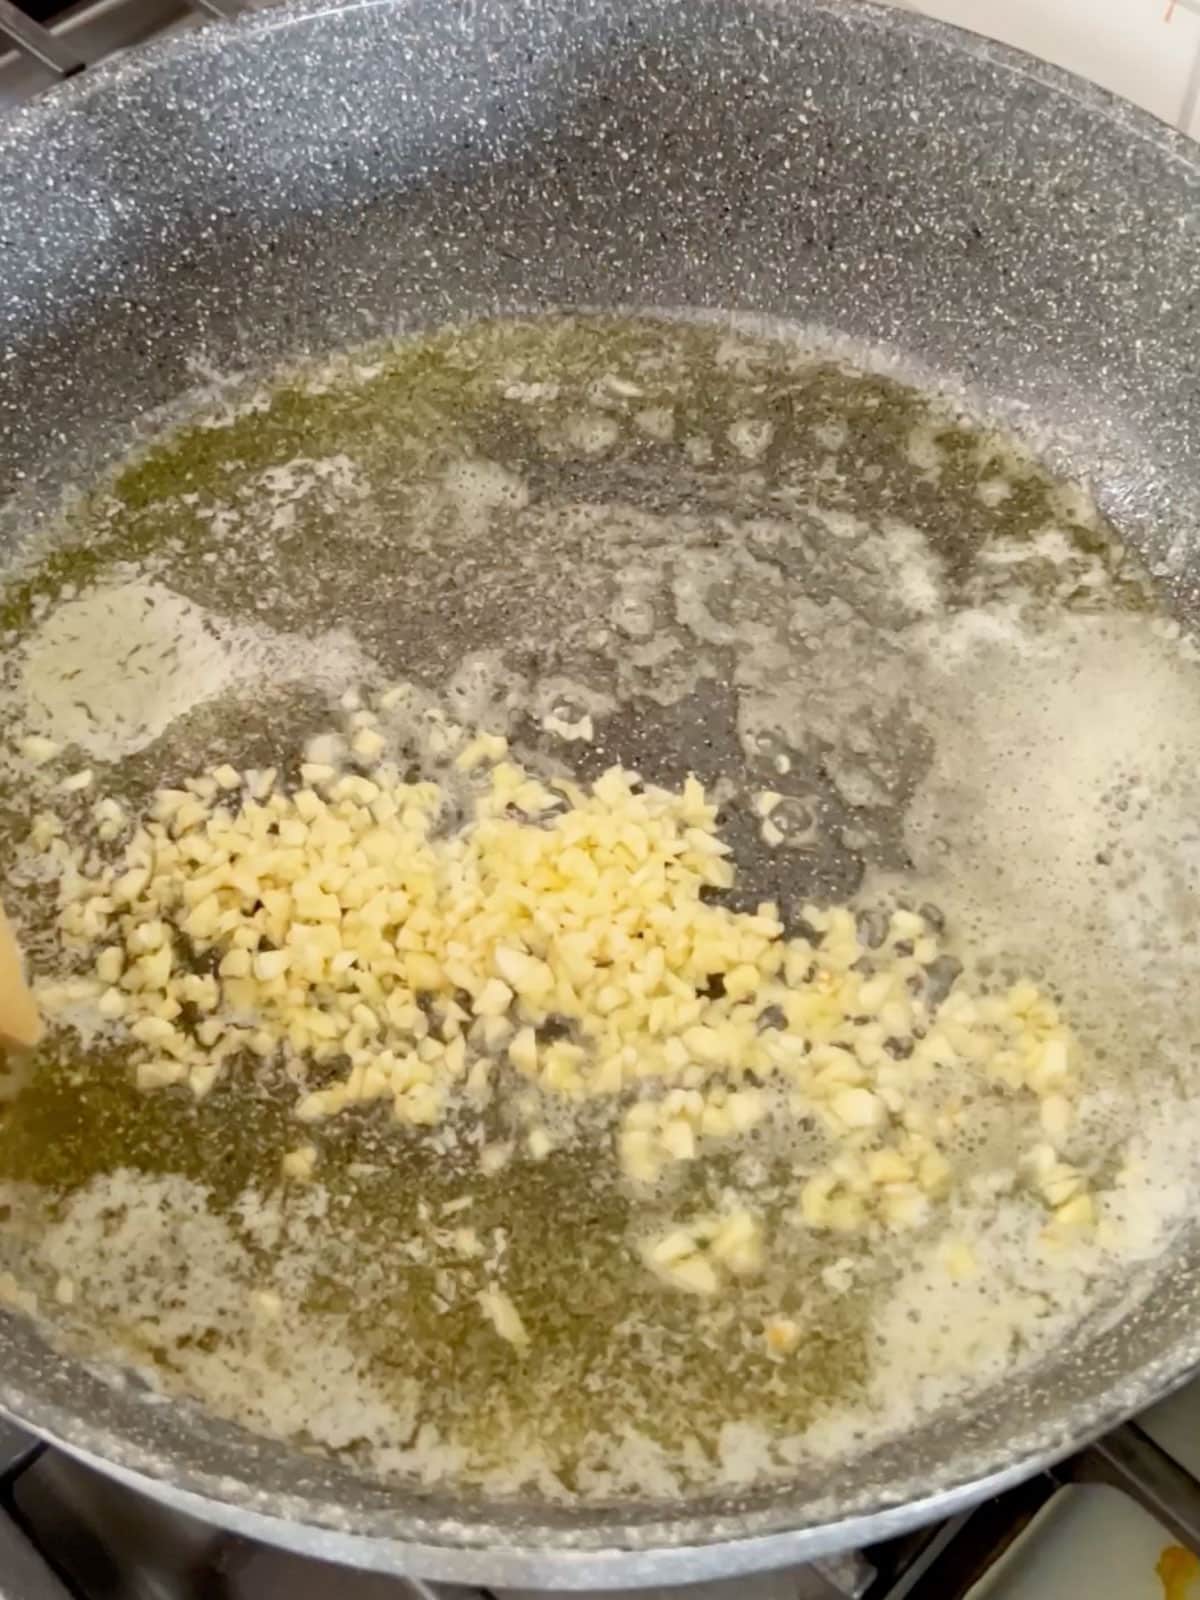 Minced garlic added to the skillet.